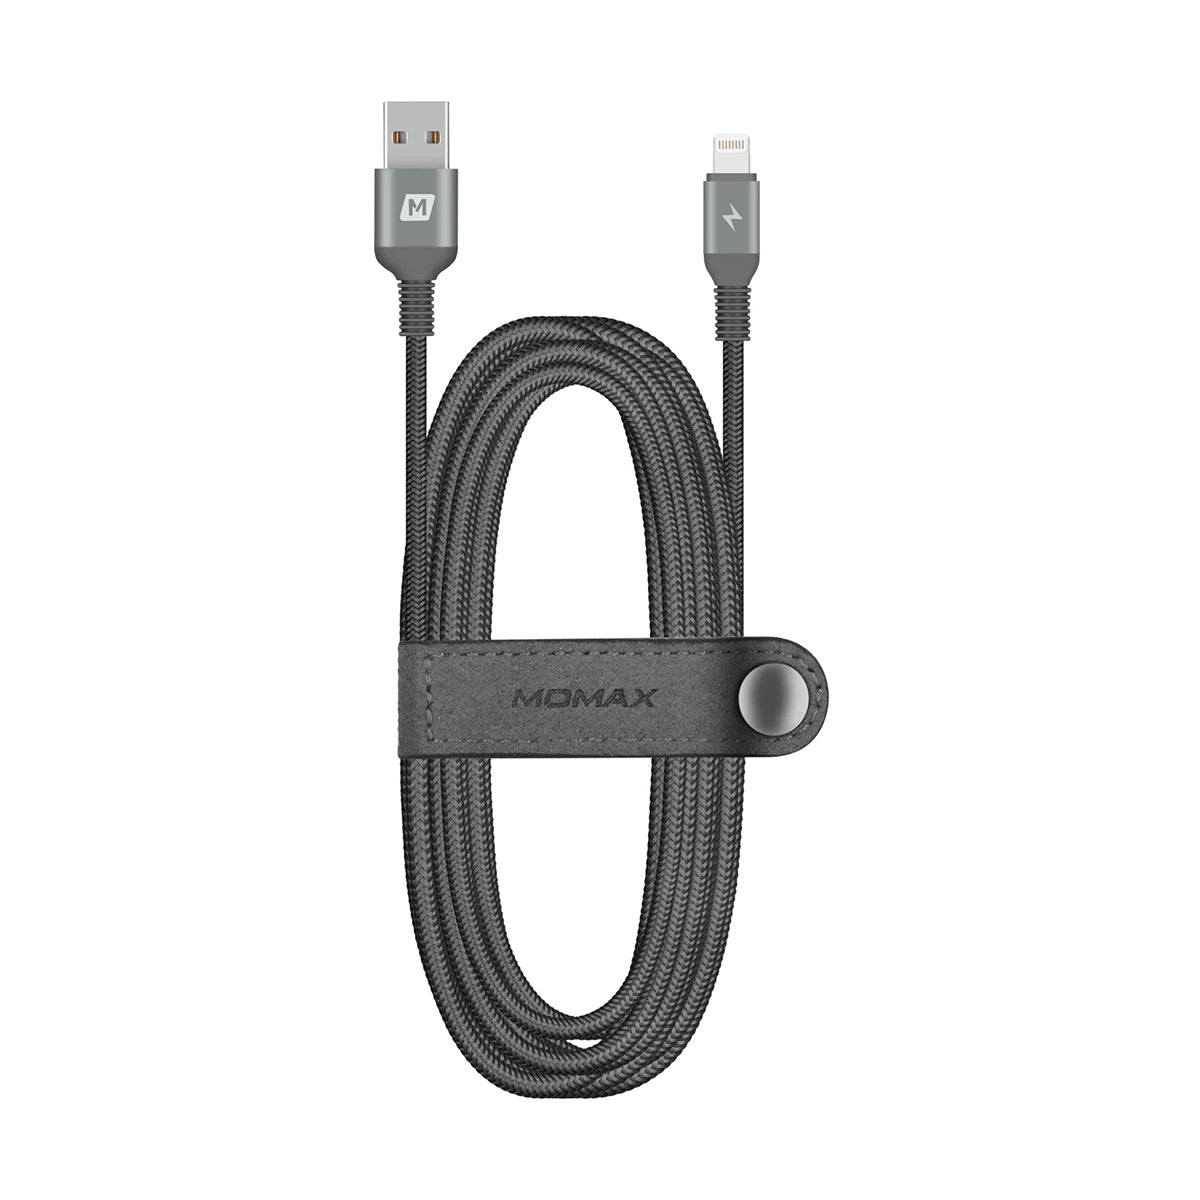 Momax Elite Link Lightning Cable Triple-Braided Charging Cable (2m)